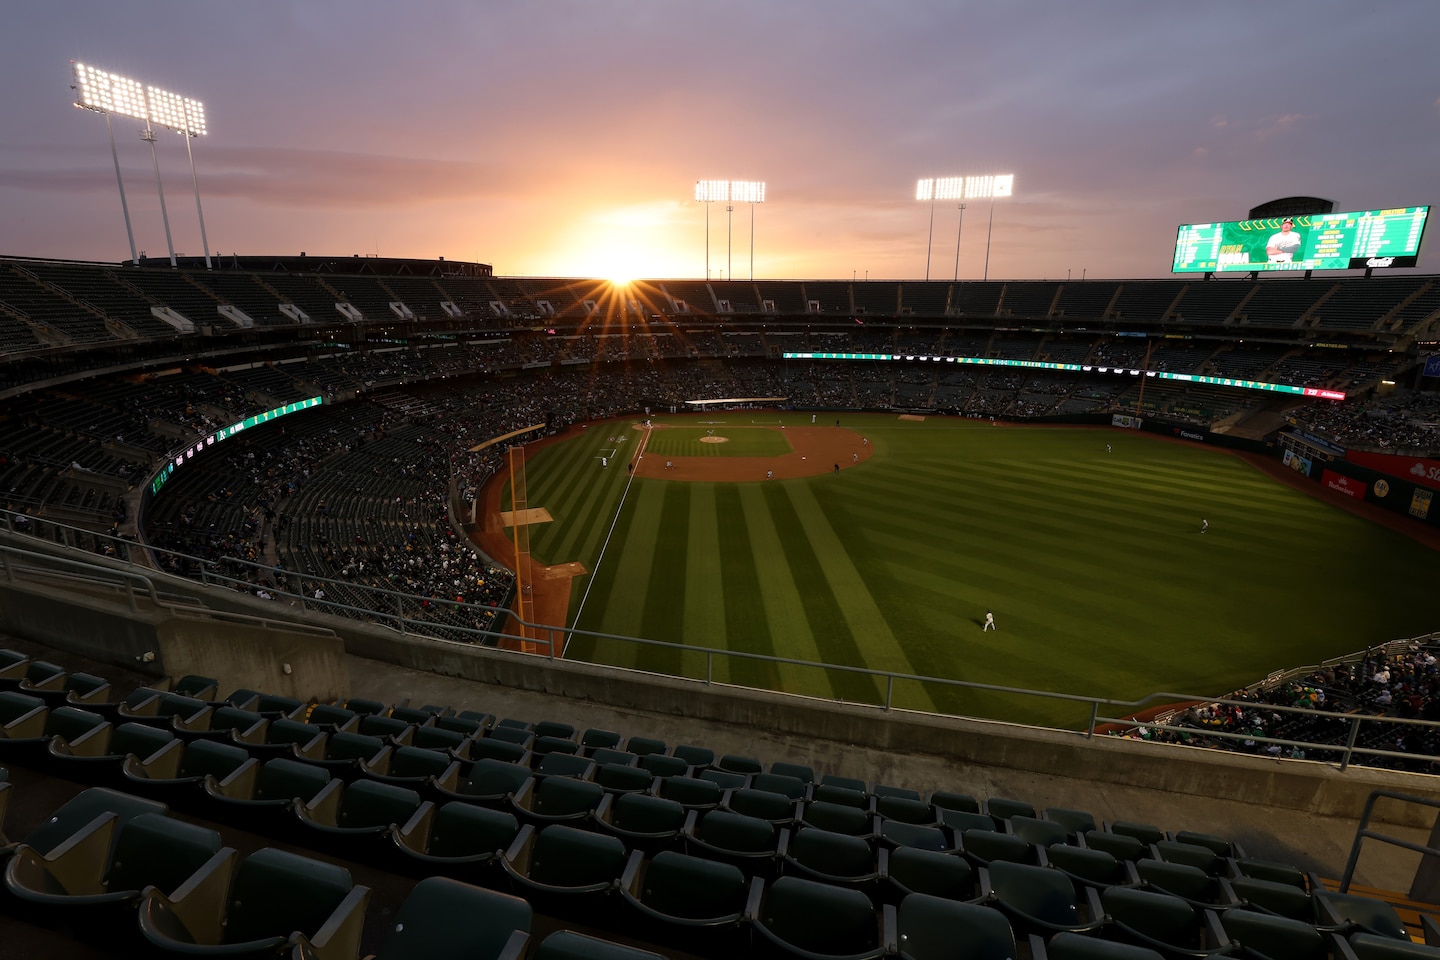 Amid a messy split, A’s announce temporary move to minor league park